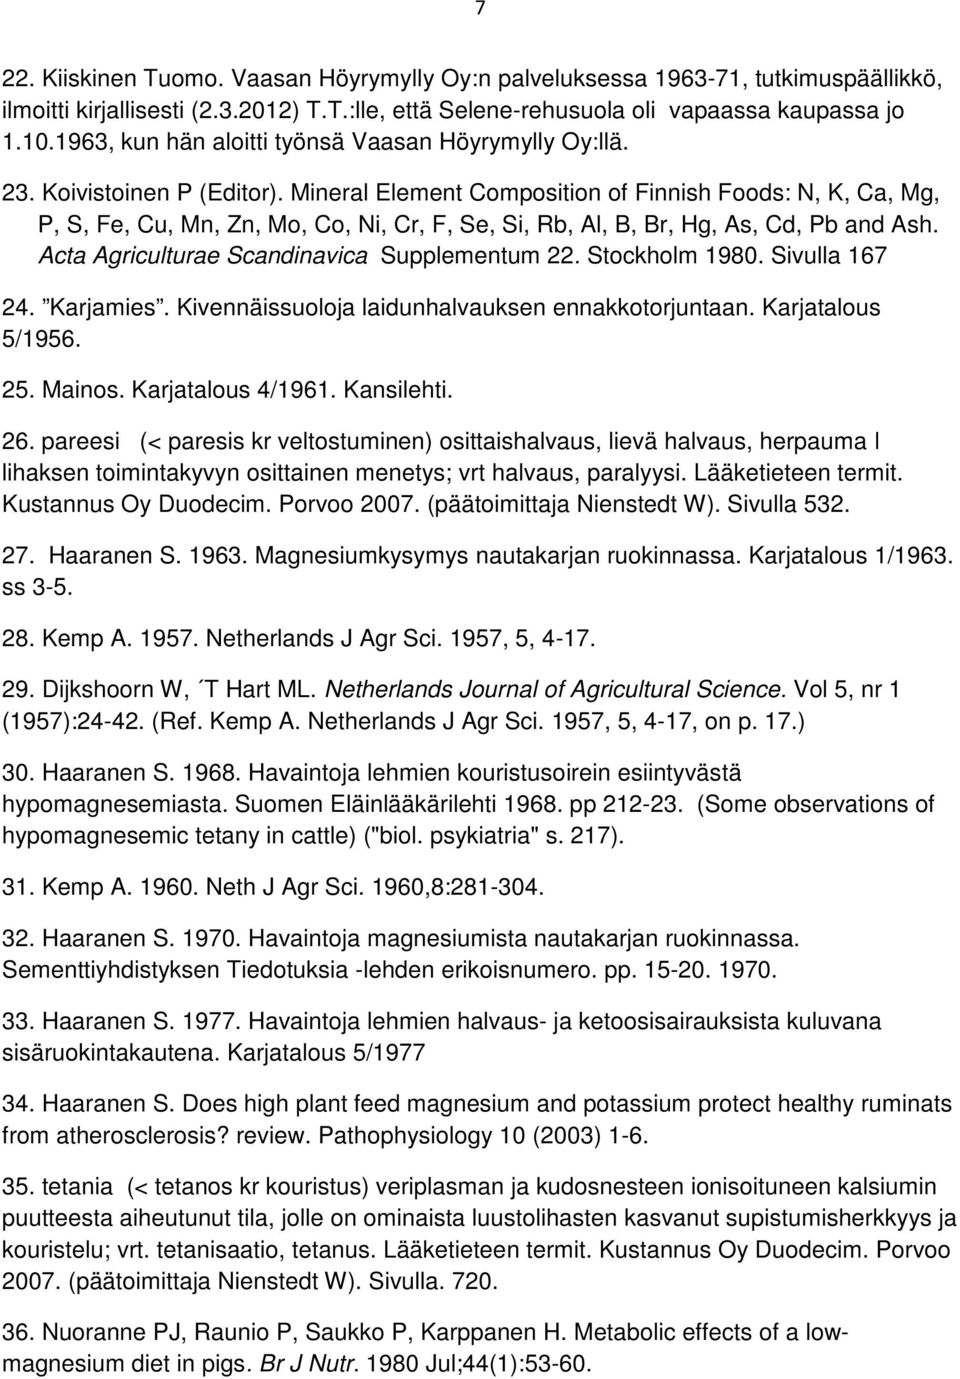 Mineral Element Composition of Finnish Foods: N, K, Ca, Mg, P, S, Fe, Cu, Mn, Zn, Mo, Co, Ni, Cr, F, Se, Si, Rb, Al, B, Br, Hg, As, Cd, Pb and Ash. Acta Agriculturae Scandinavica Supplementum 22.